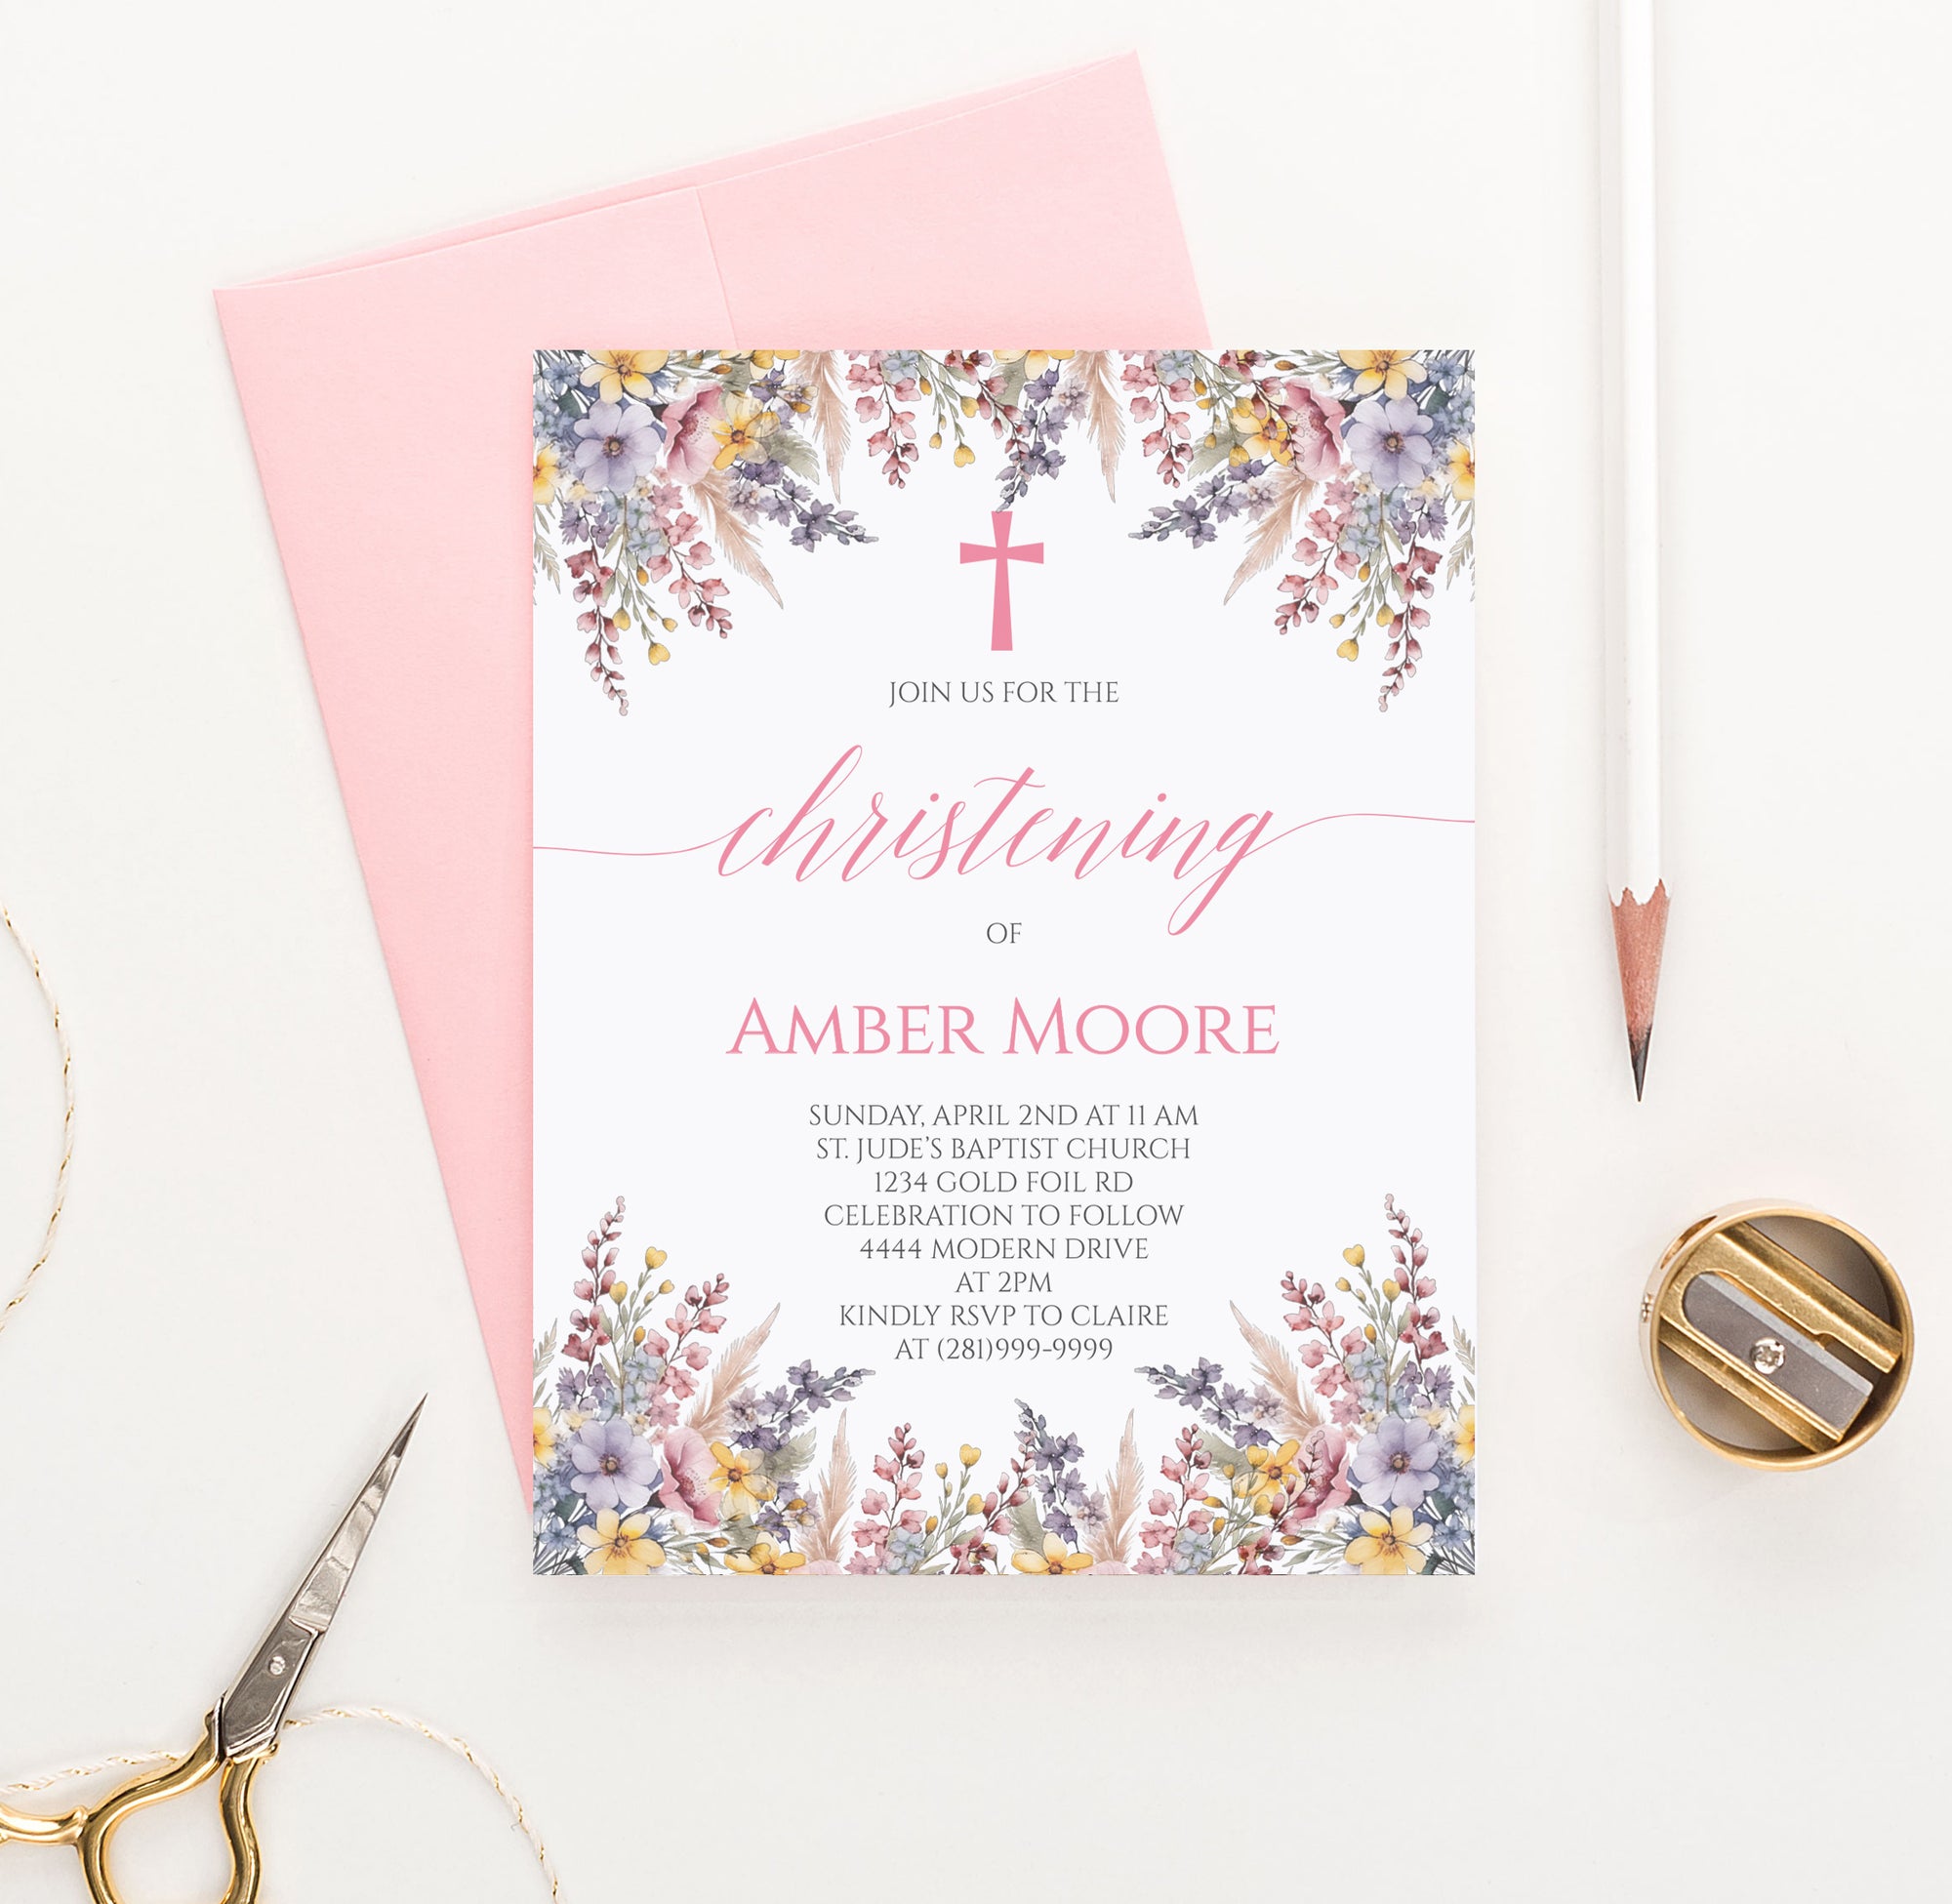 Unique Invitation For Christening With Florals